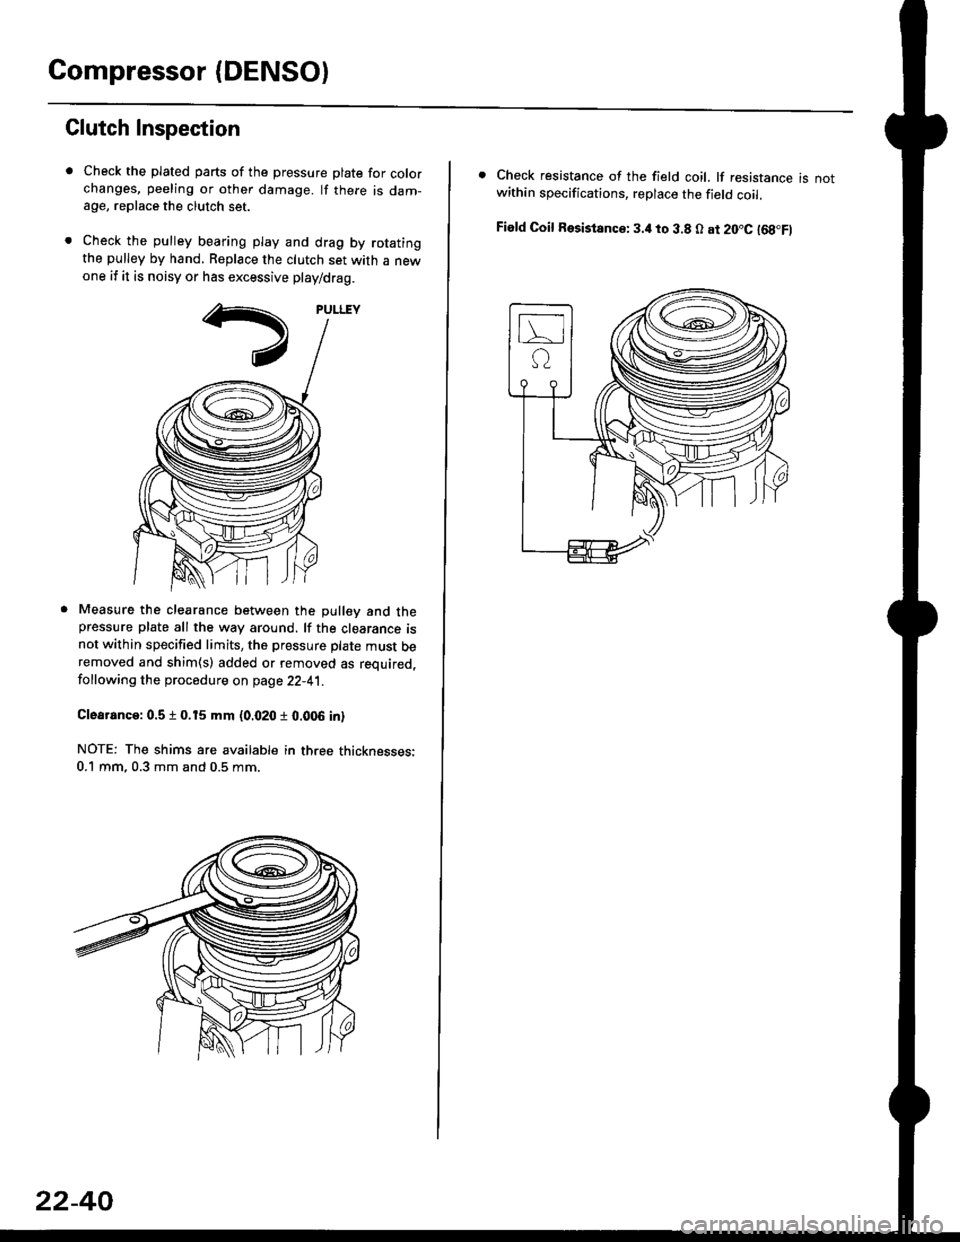 HONDA CIVIC 1996 6.G Owners Manual Compressor (DENSOI
Clutch Inspection
Check the plated parts of the pressure plate for colo.changes, peeling or other damage. lf there is dam-age, replace the clutch set.
Check the pulley bearing play 